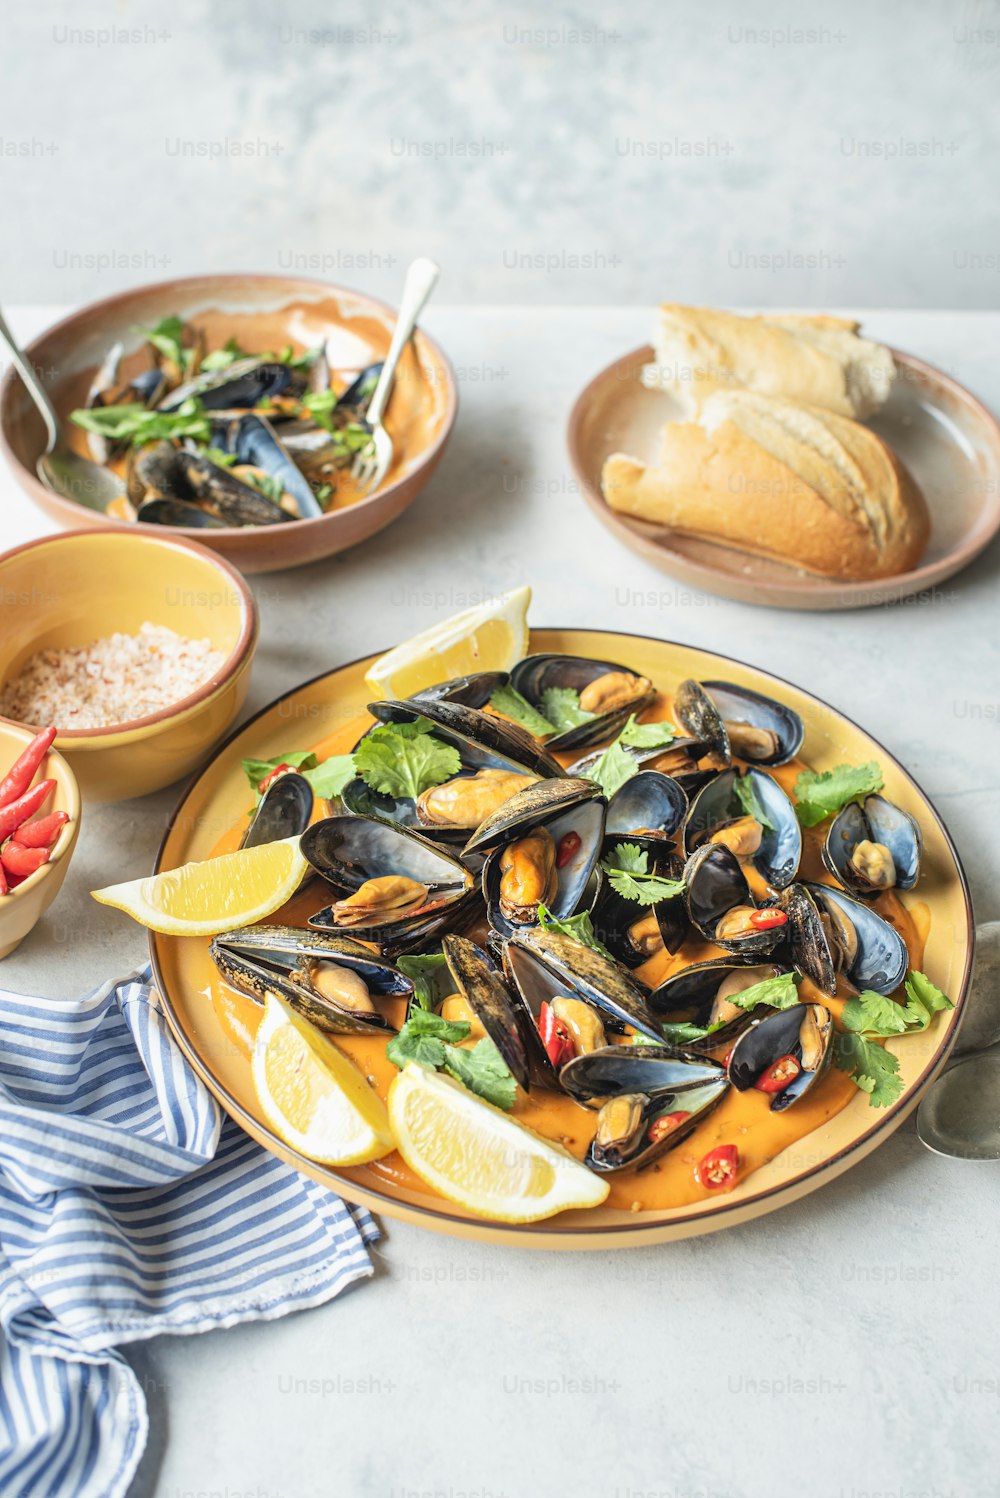 a plate of mussels and a bowl of bread